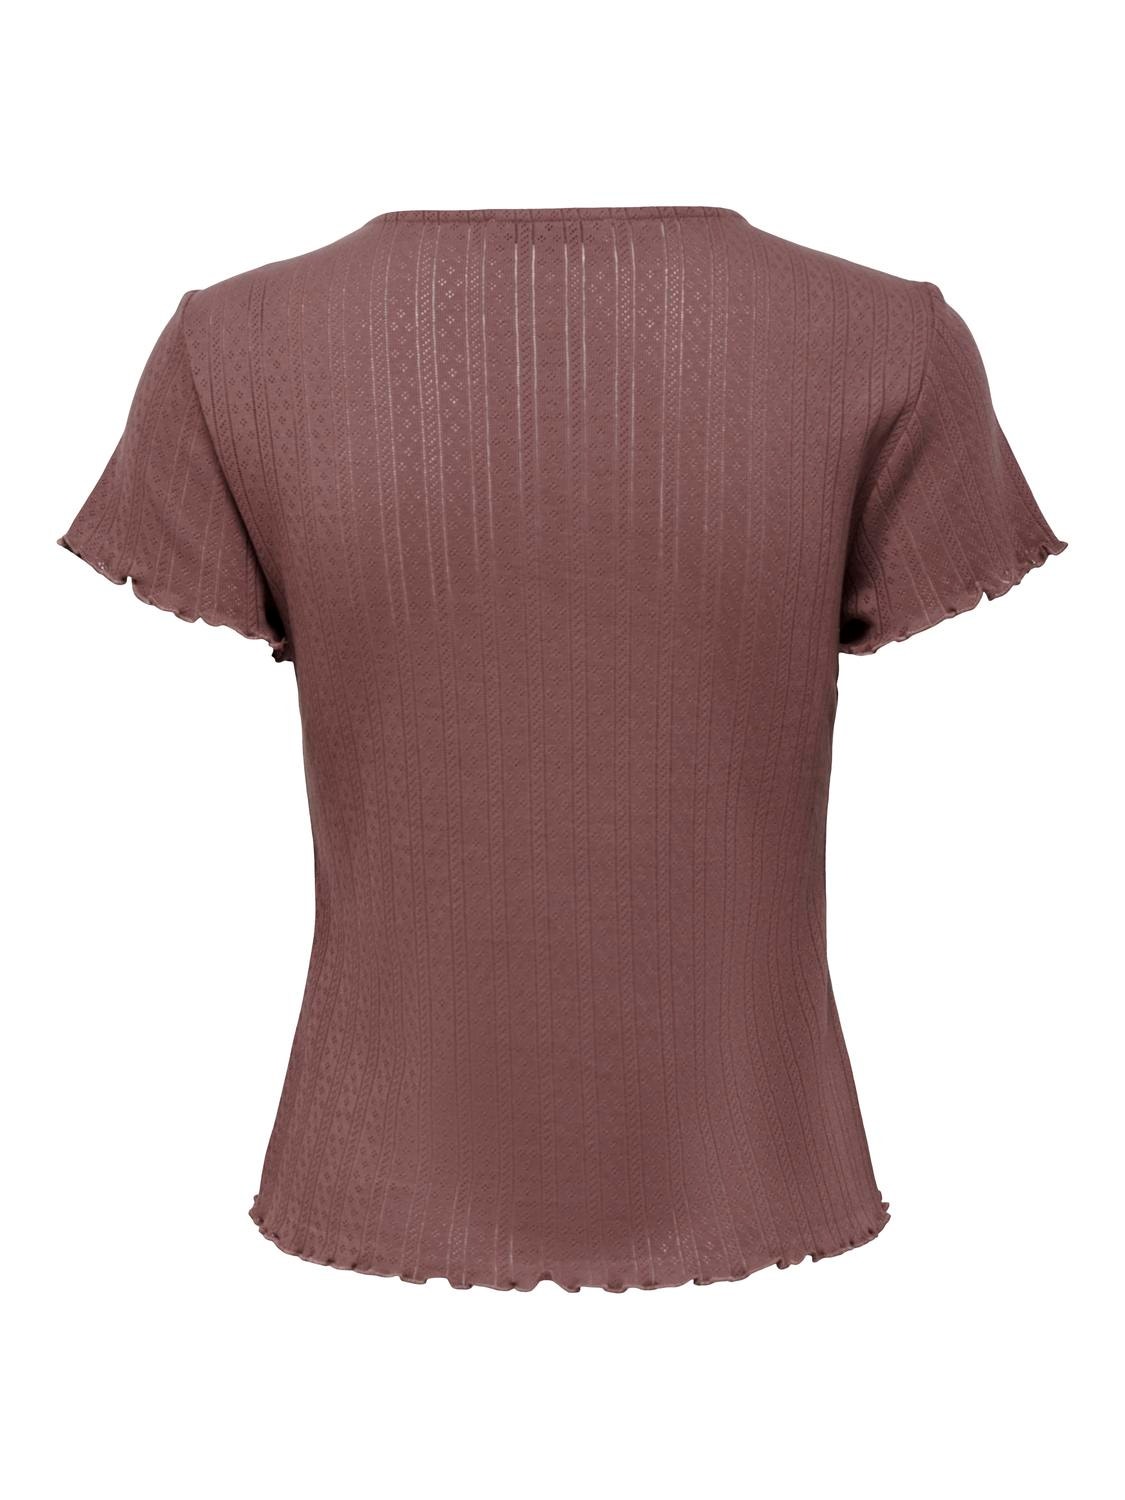 ONLY Solid colored top -Rose Brown - 15256154